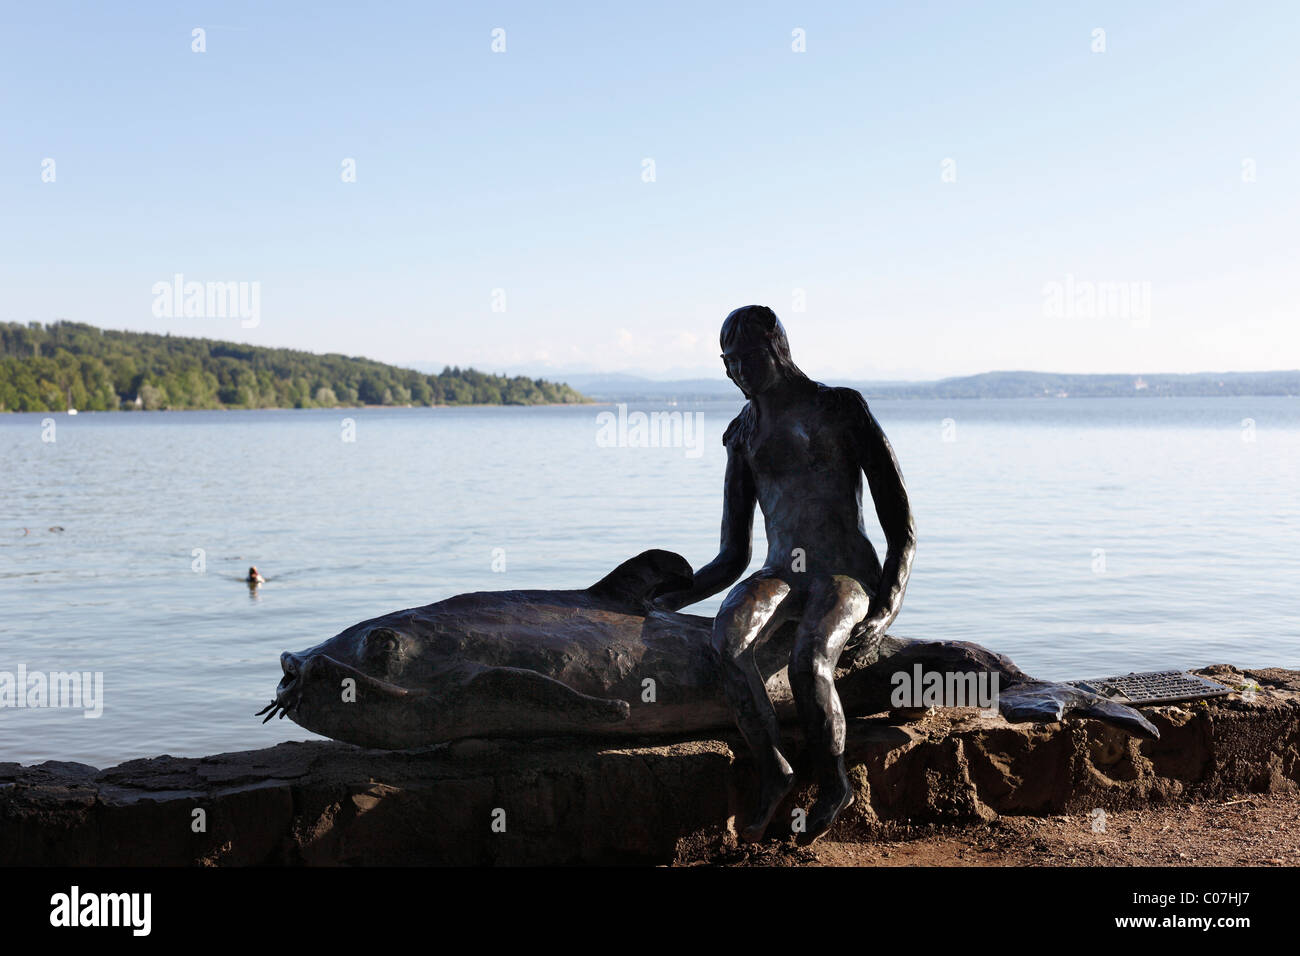 The Little Mermaid, sculpture by Hilde Grotewahl, 2005, Herschinger, Ammersee lake, Fuenfseenland or Five Lakes region Stock Photo